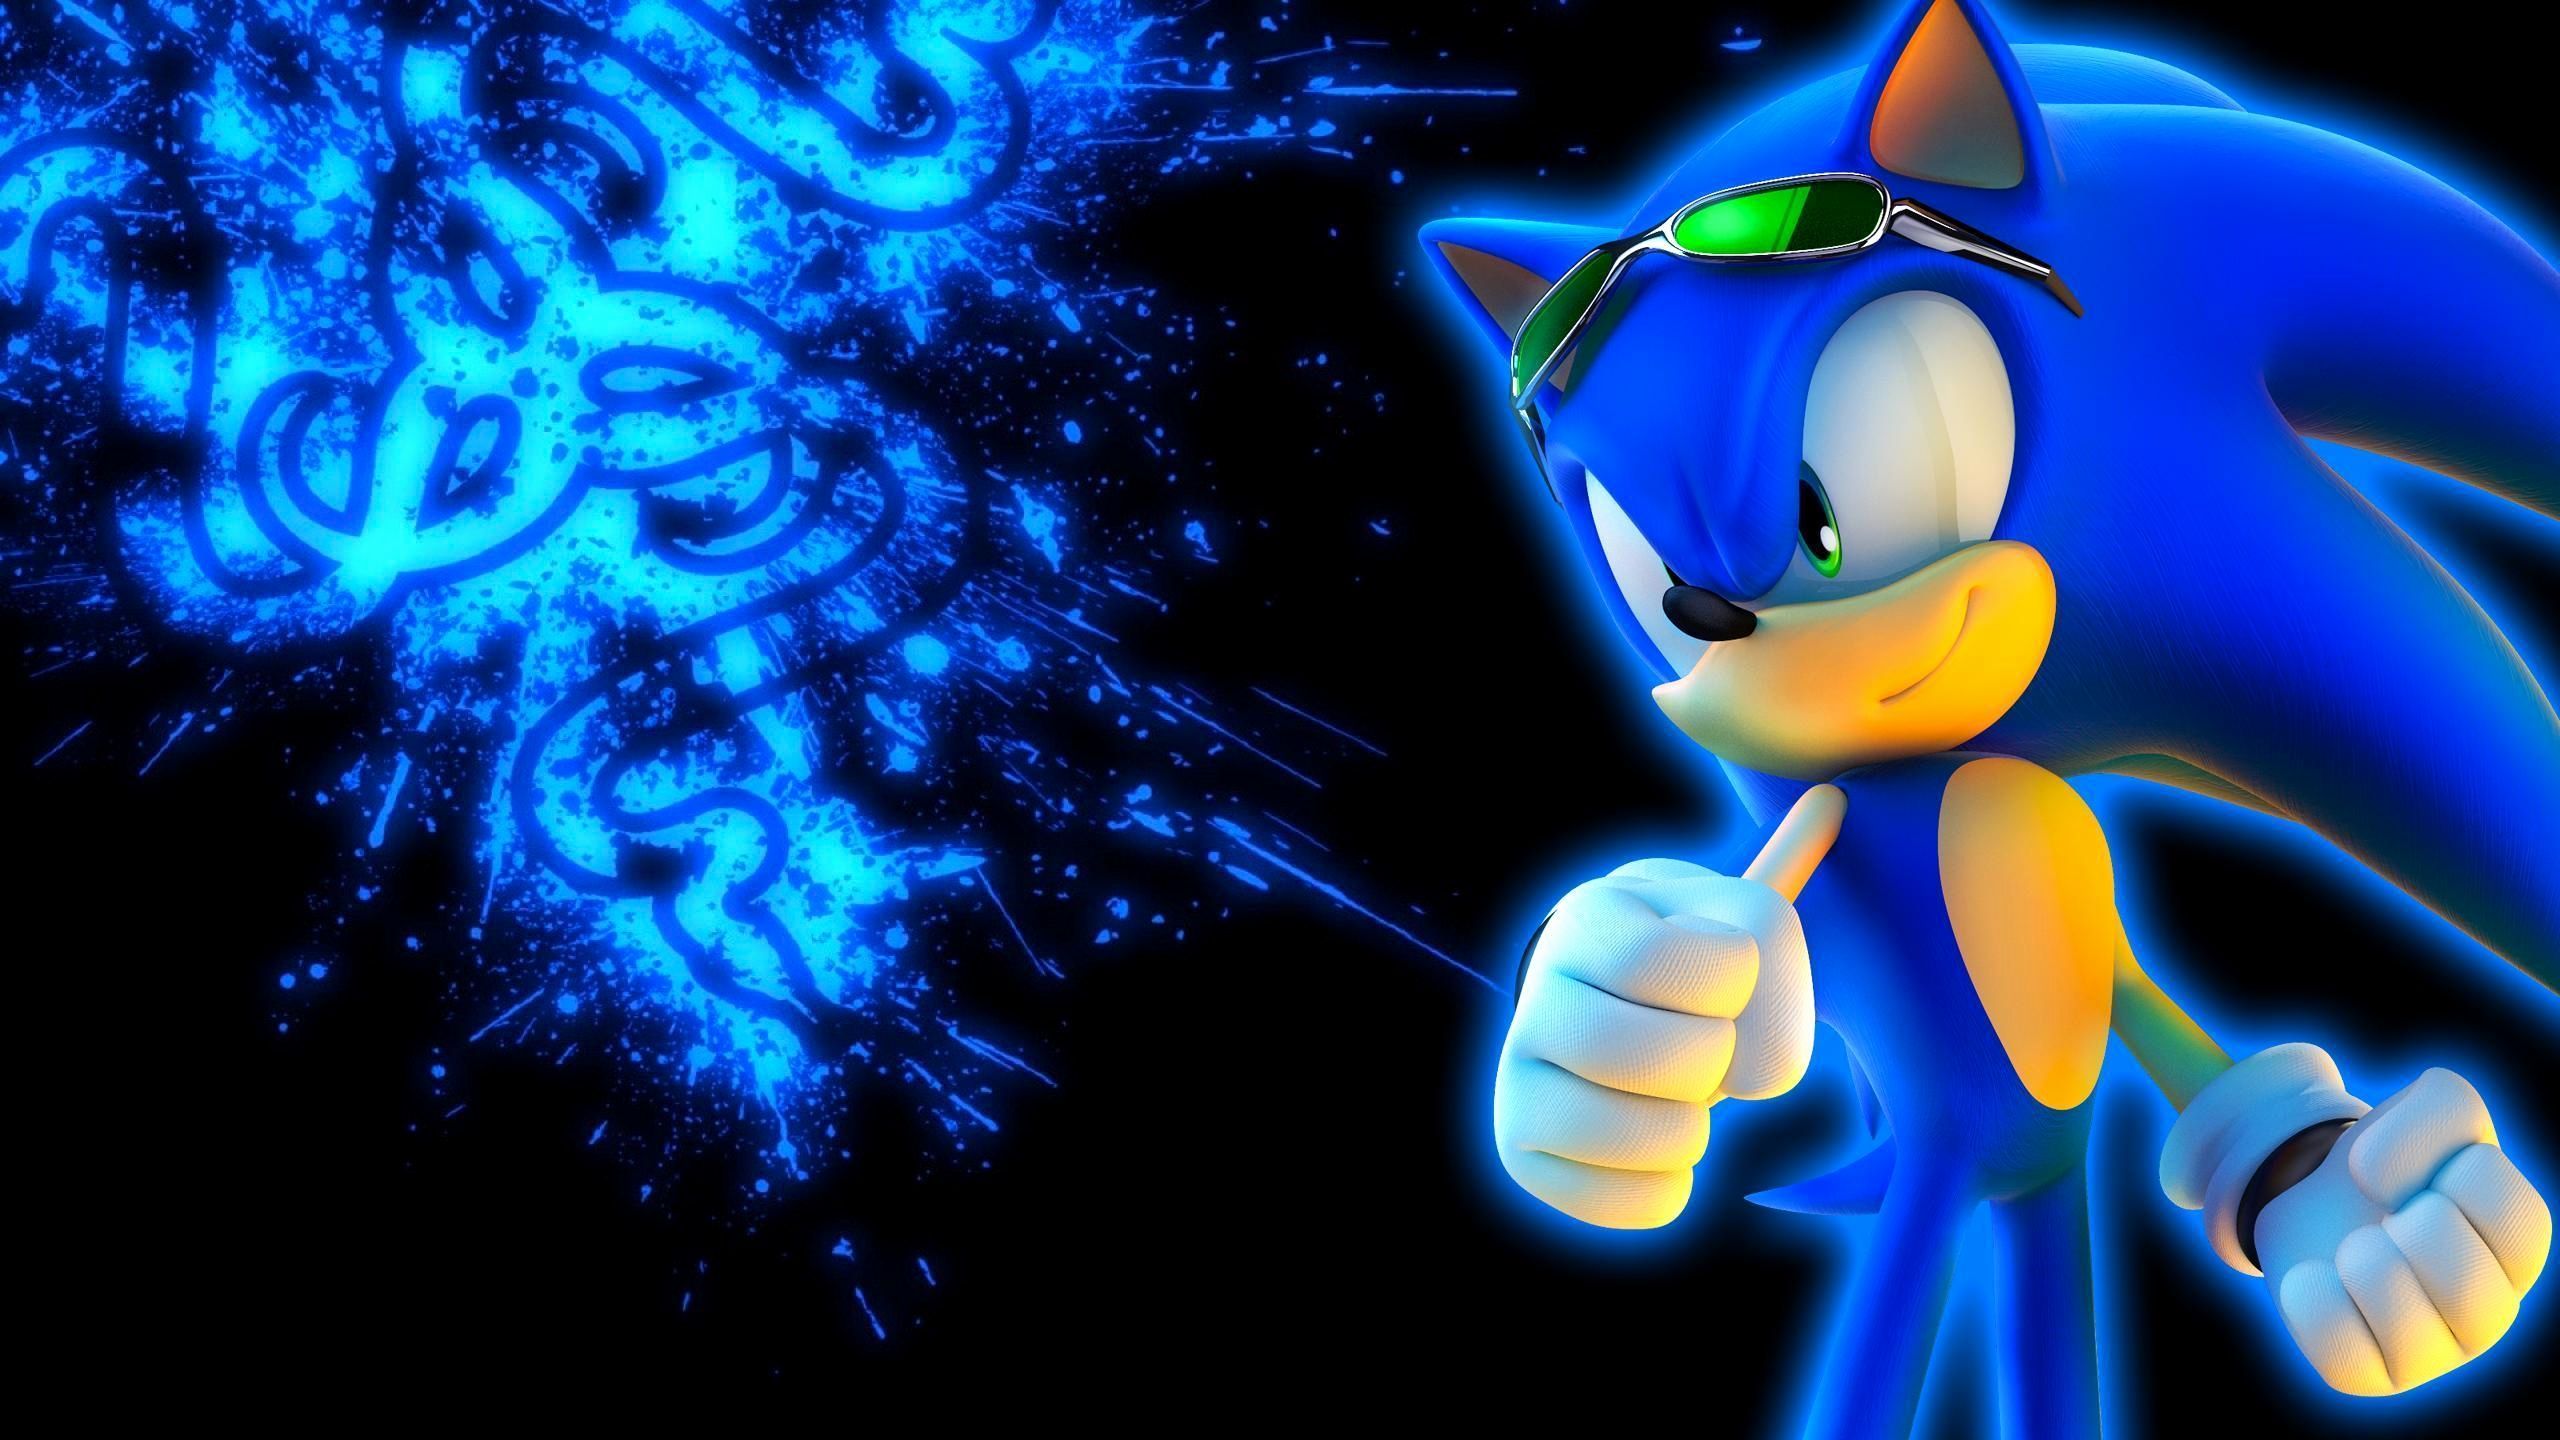 SONIC.EXE! Minecraft Wallpapers - Wallpaper Cave